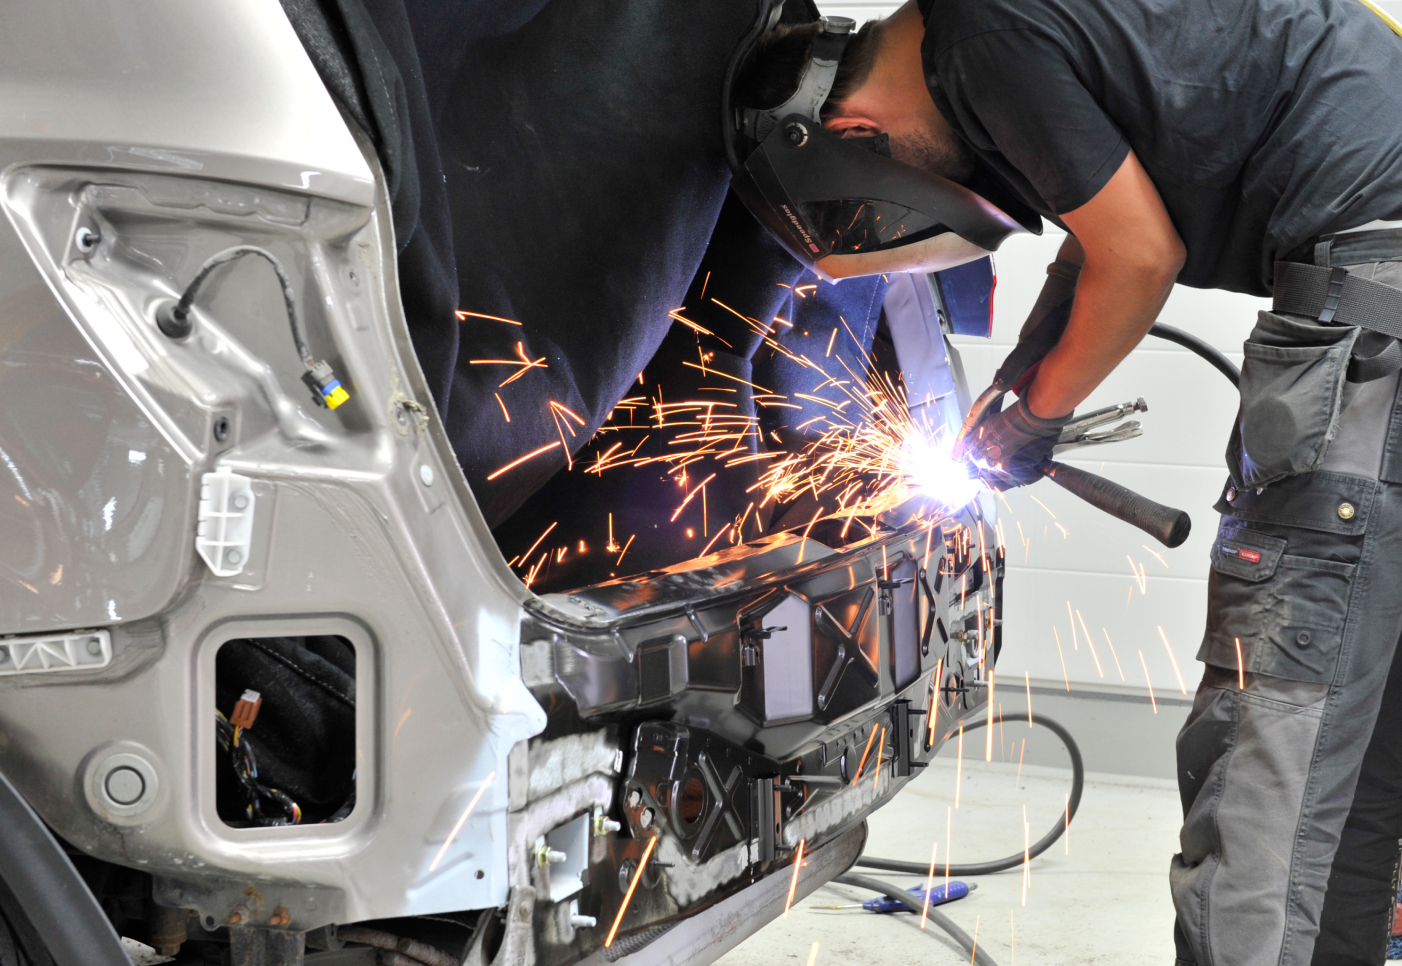 Close-up of a man welding the rear of a car.